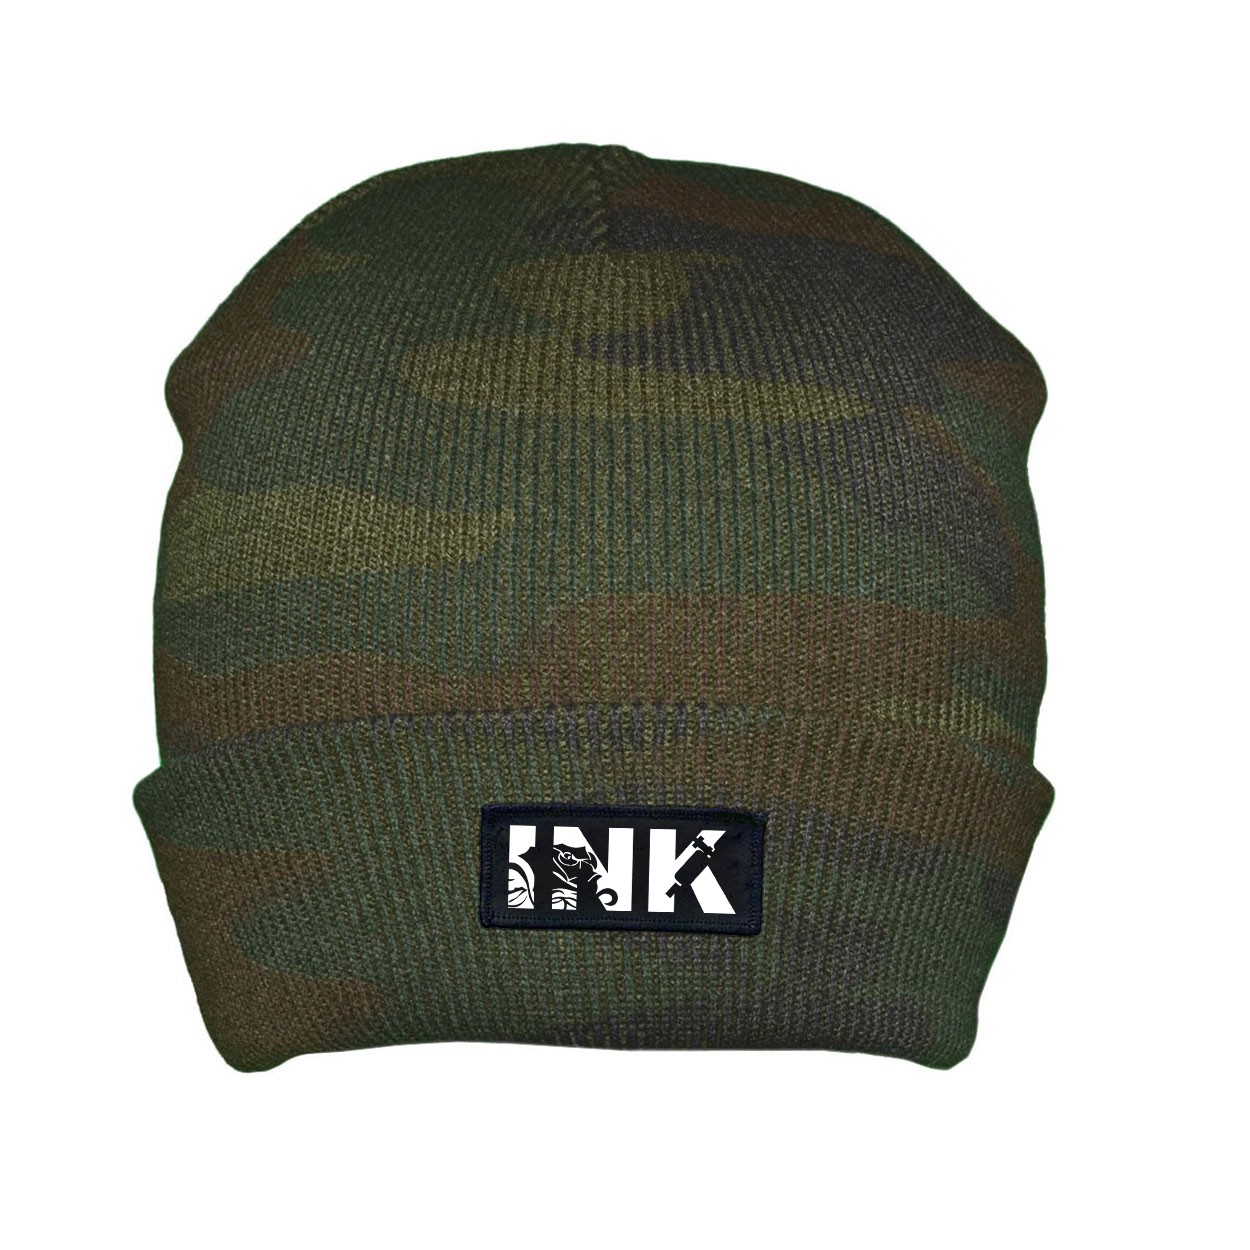 Ink Tattoo Logo Night Out Woven Patch Roll Up Skully Beanie Camo (White Logo)